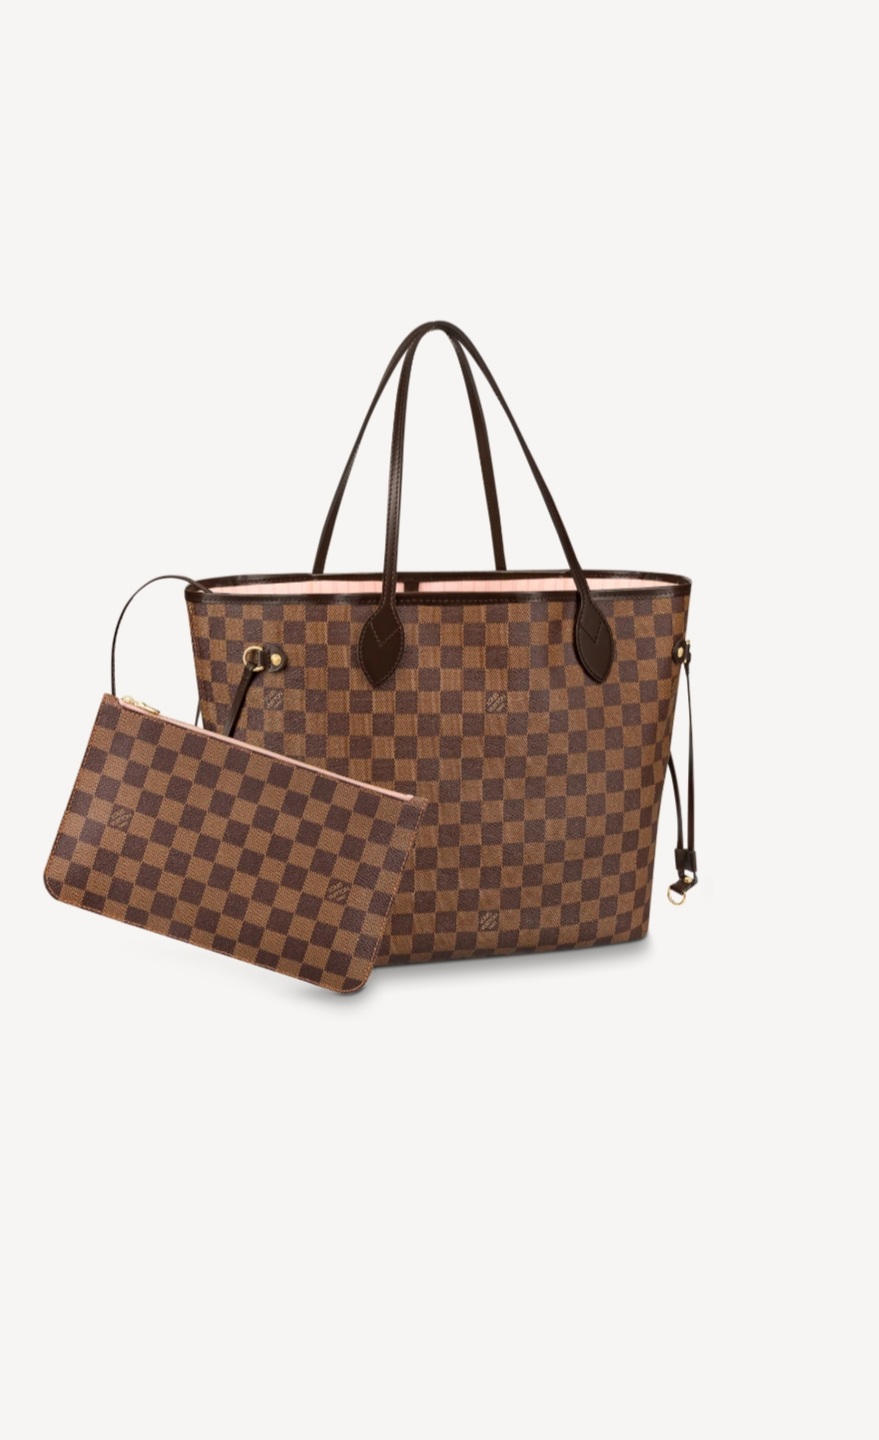 Louis Vuitton Neverfull MM Tote Bag Damier Ebene Canvas – Coco Approved  Studio